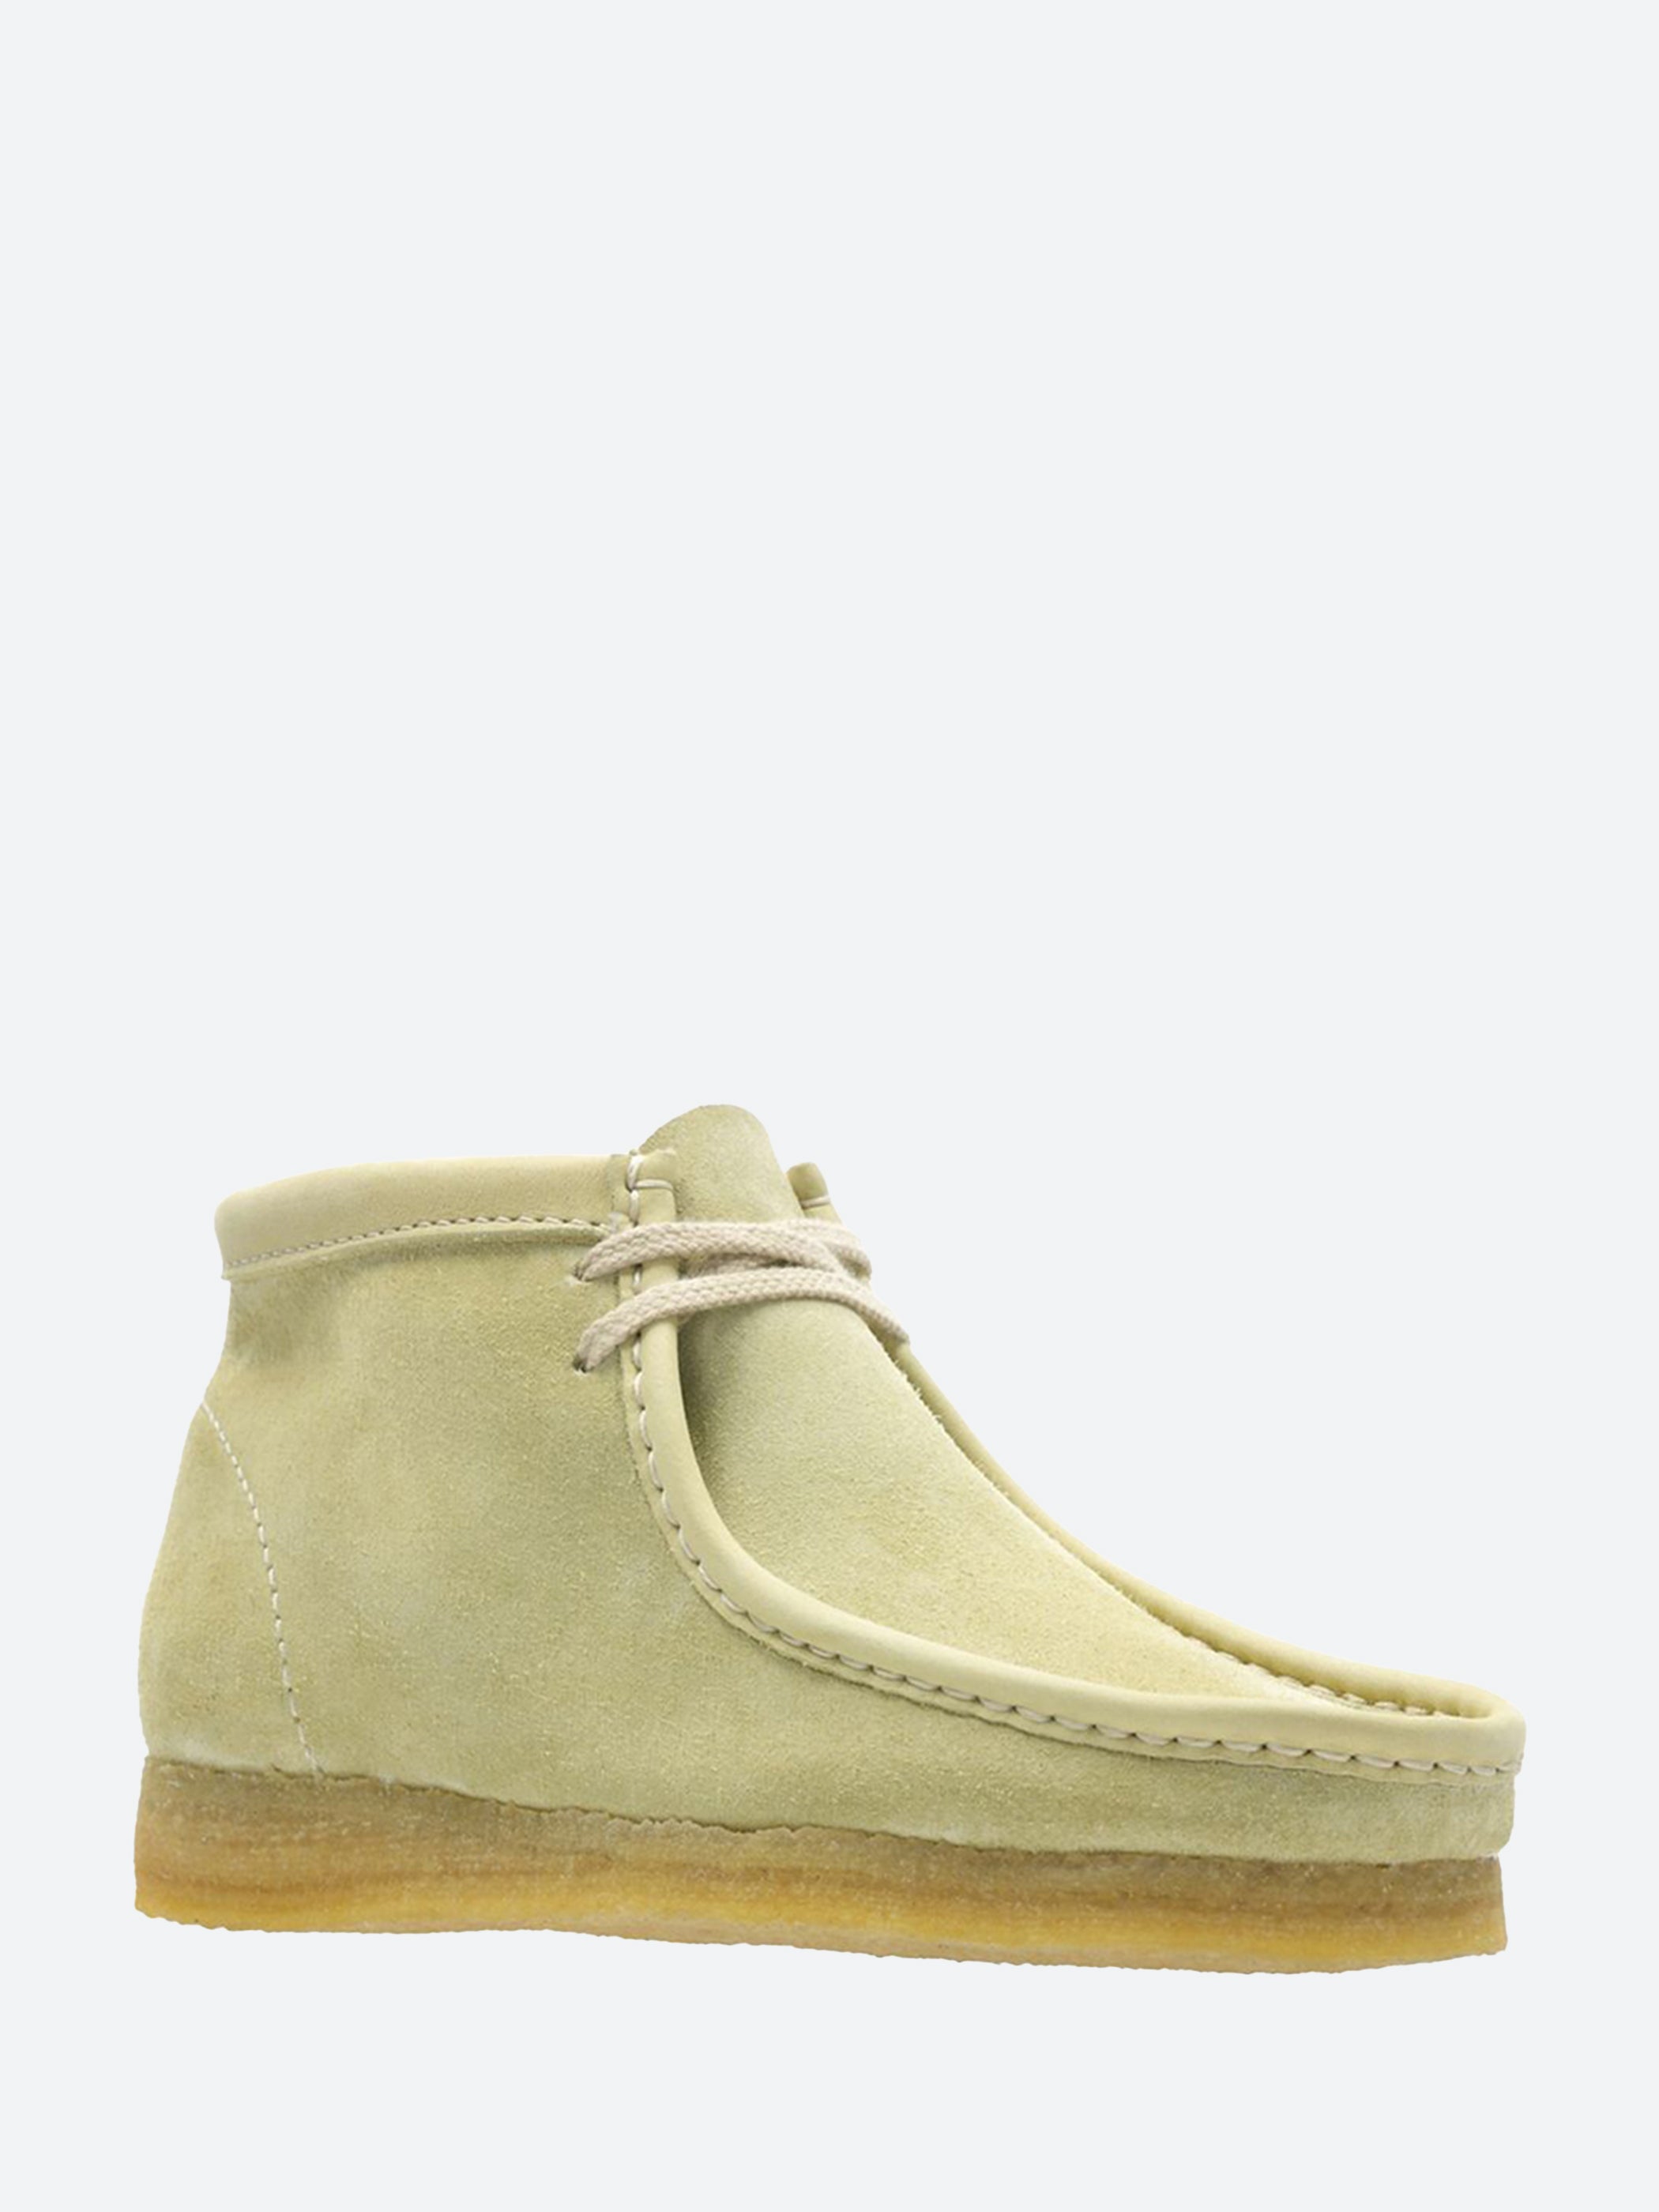 Clarks - Wallabee Boot in Maple Suede – gravitypope